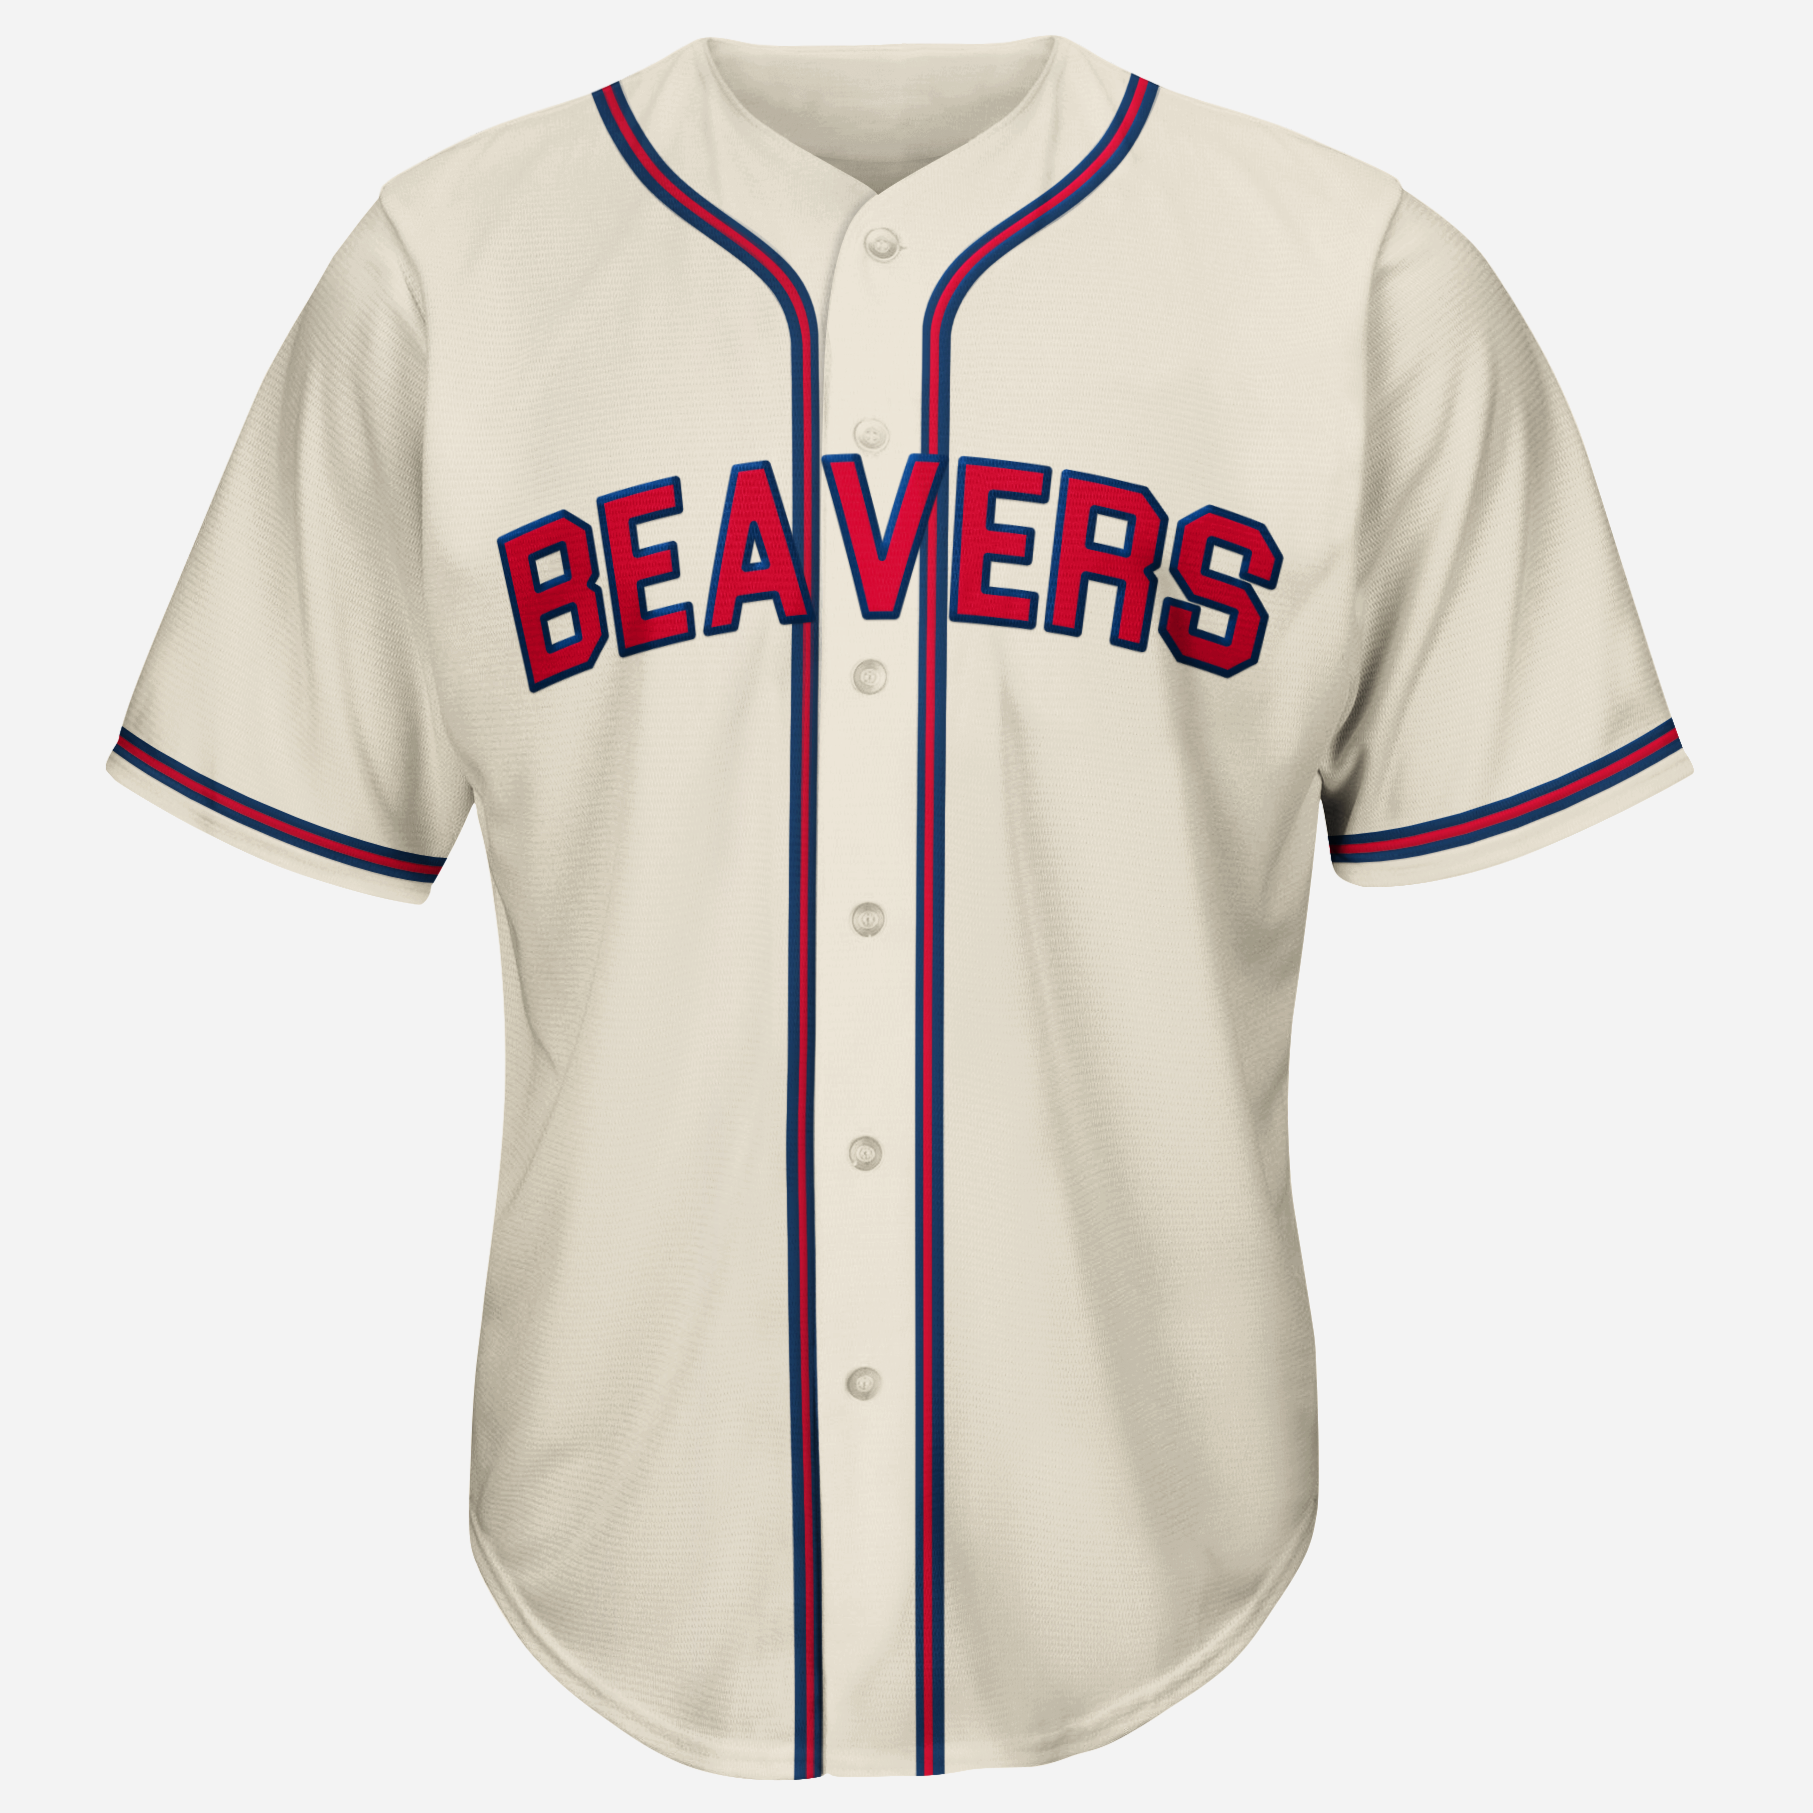 Beavers cross country Hall of Fame jerseys